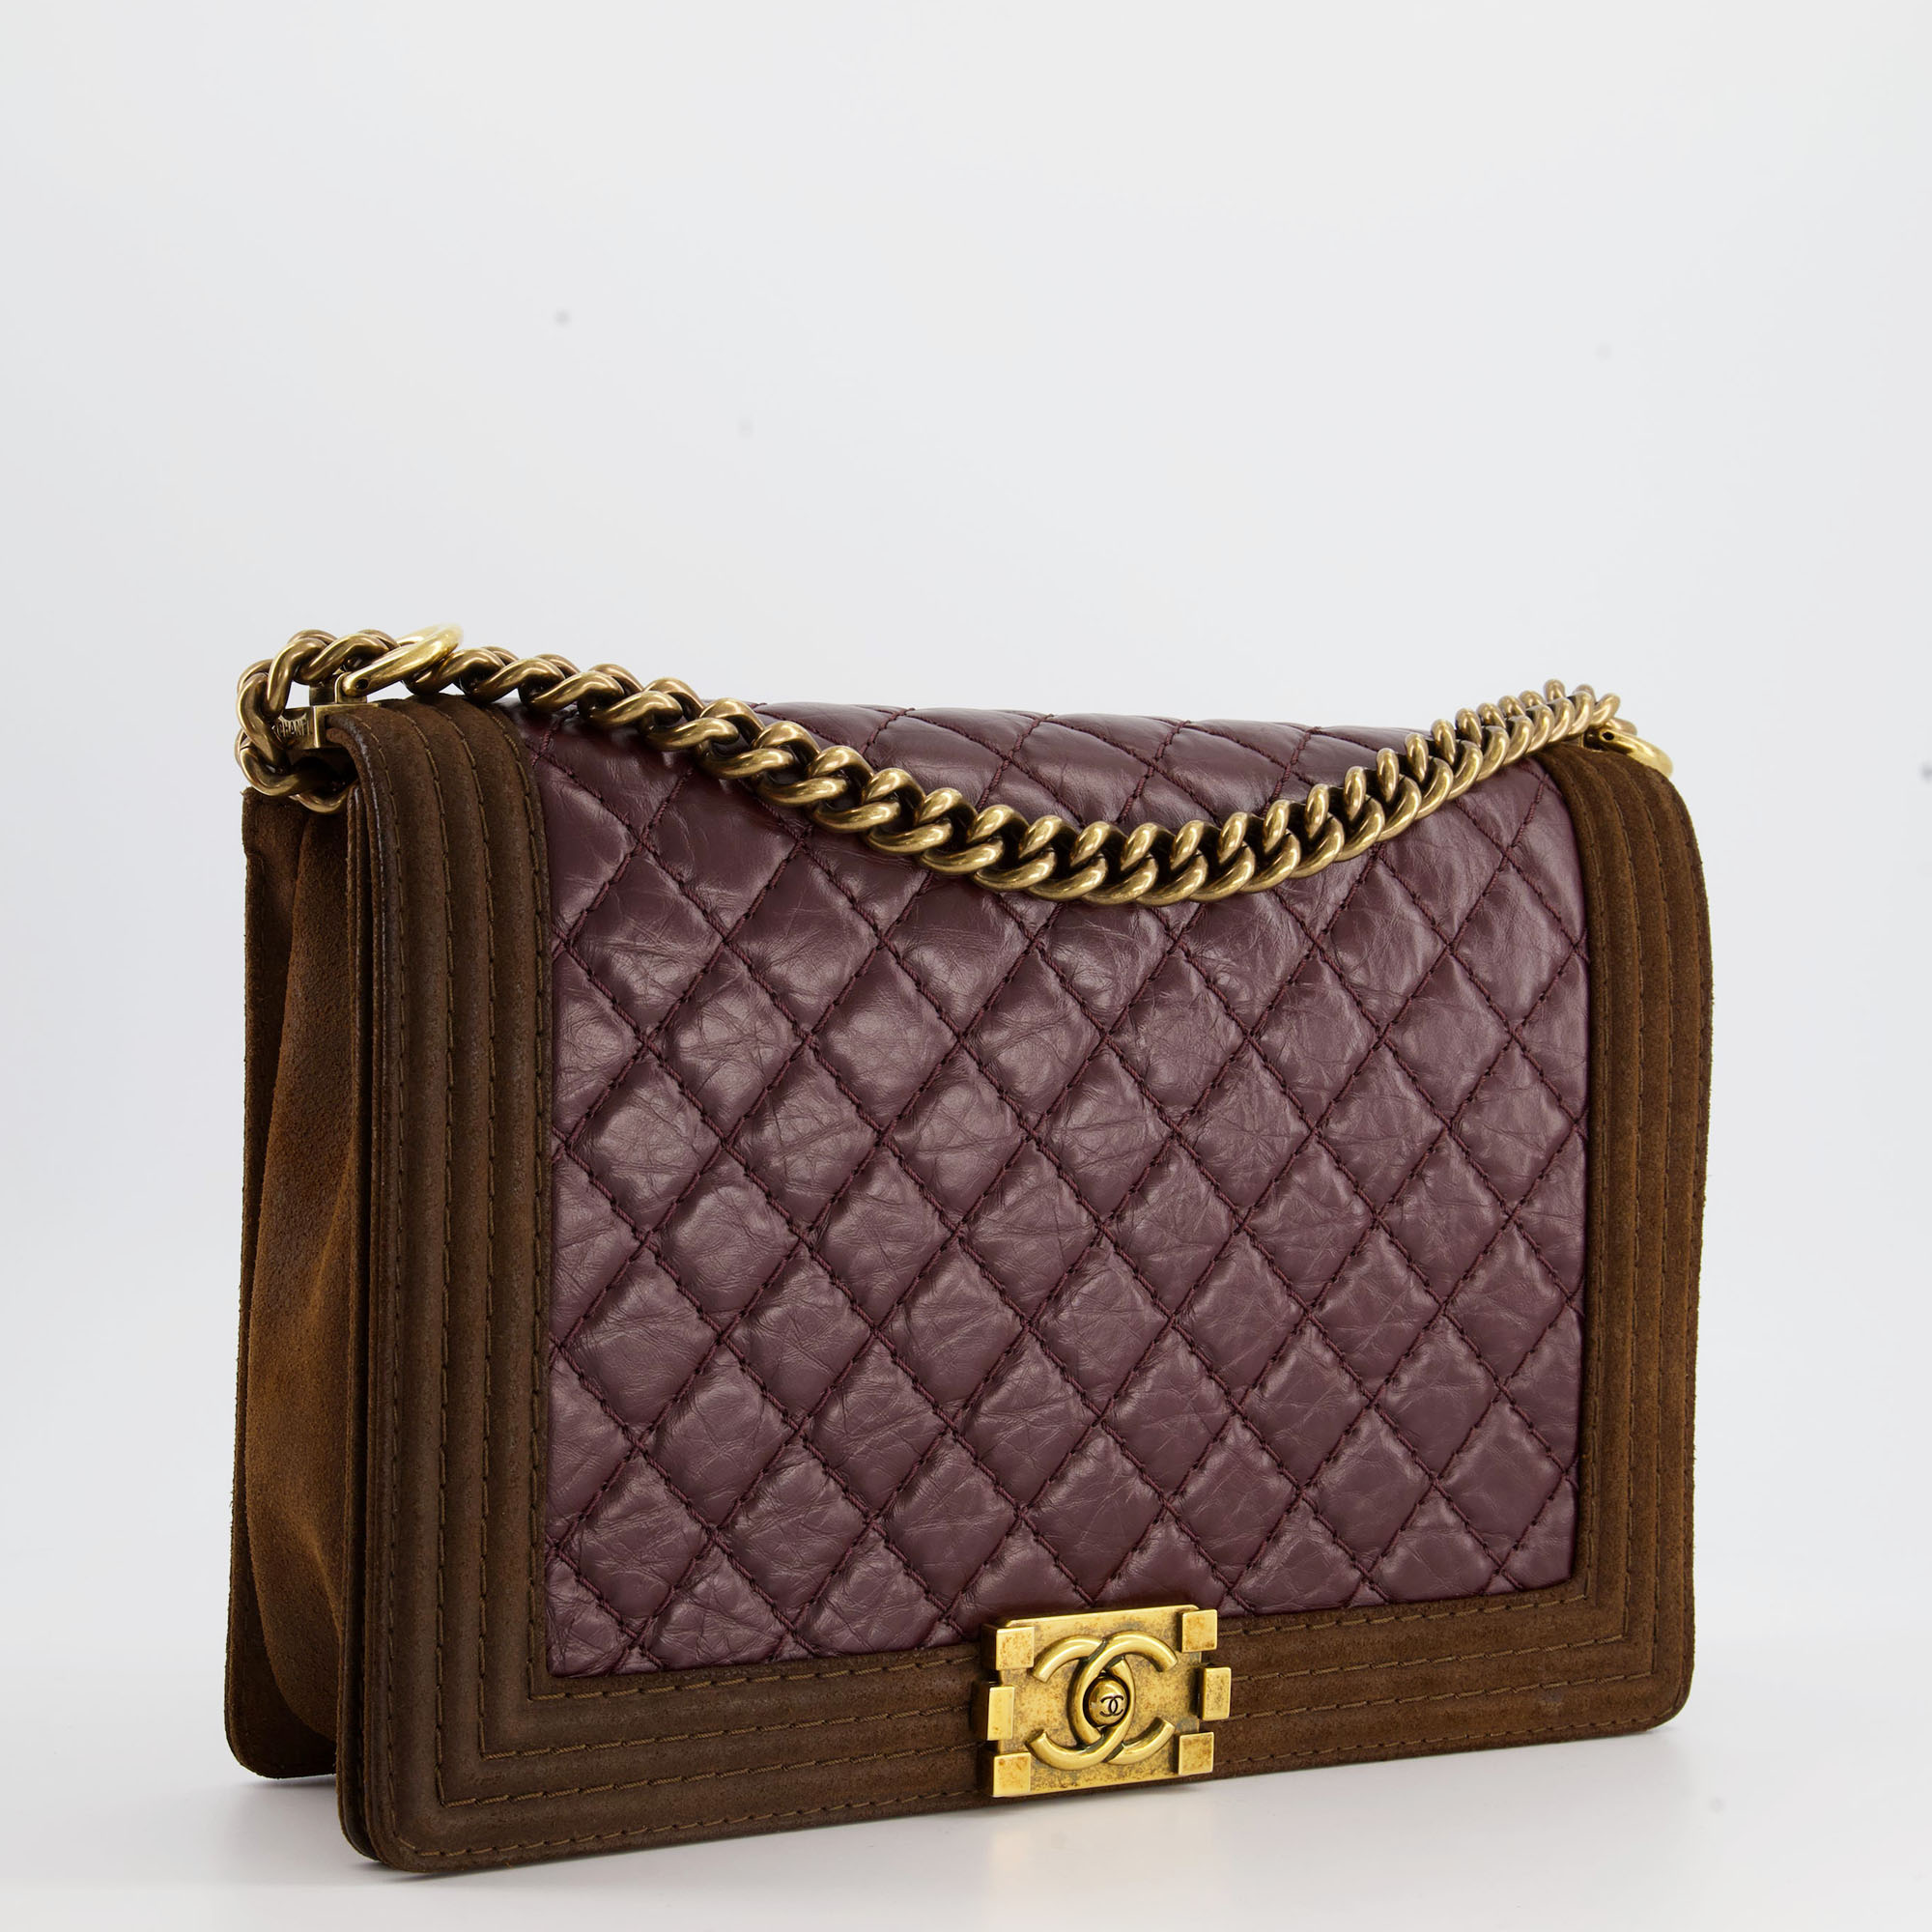 Chanel Burgundy With Brown Suede Large Boy Bag In Aged Calfskin Leather With Aged Gold Hardware